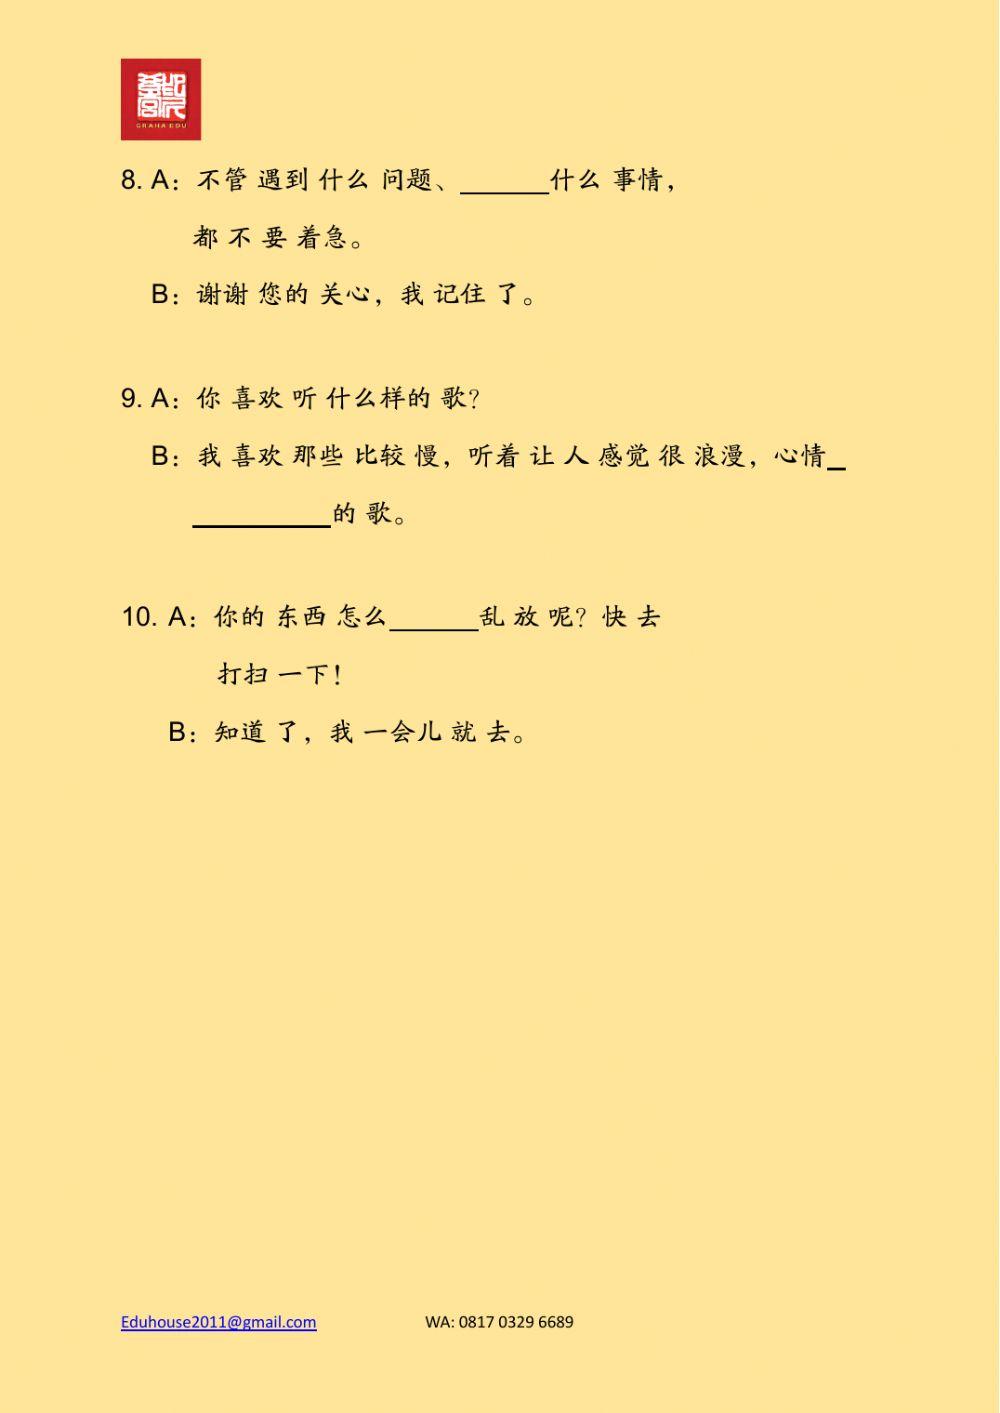 HSK 4A Textbook Unit 8 page 205 - 209